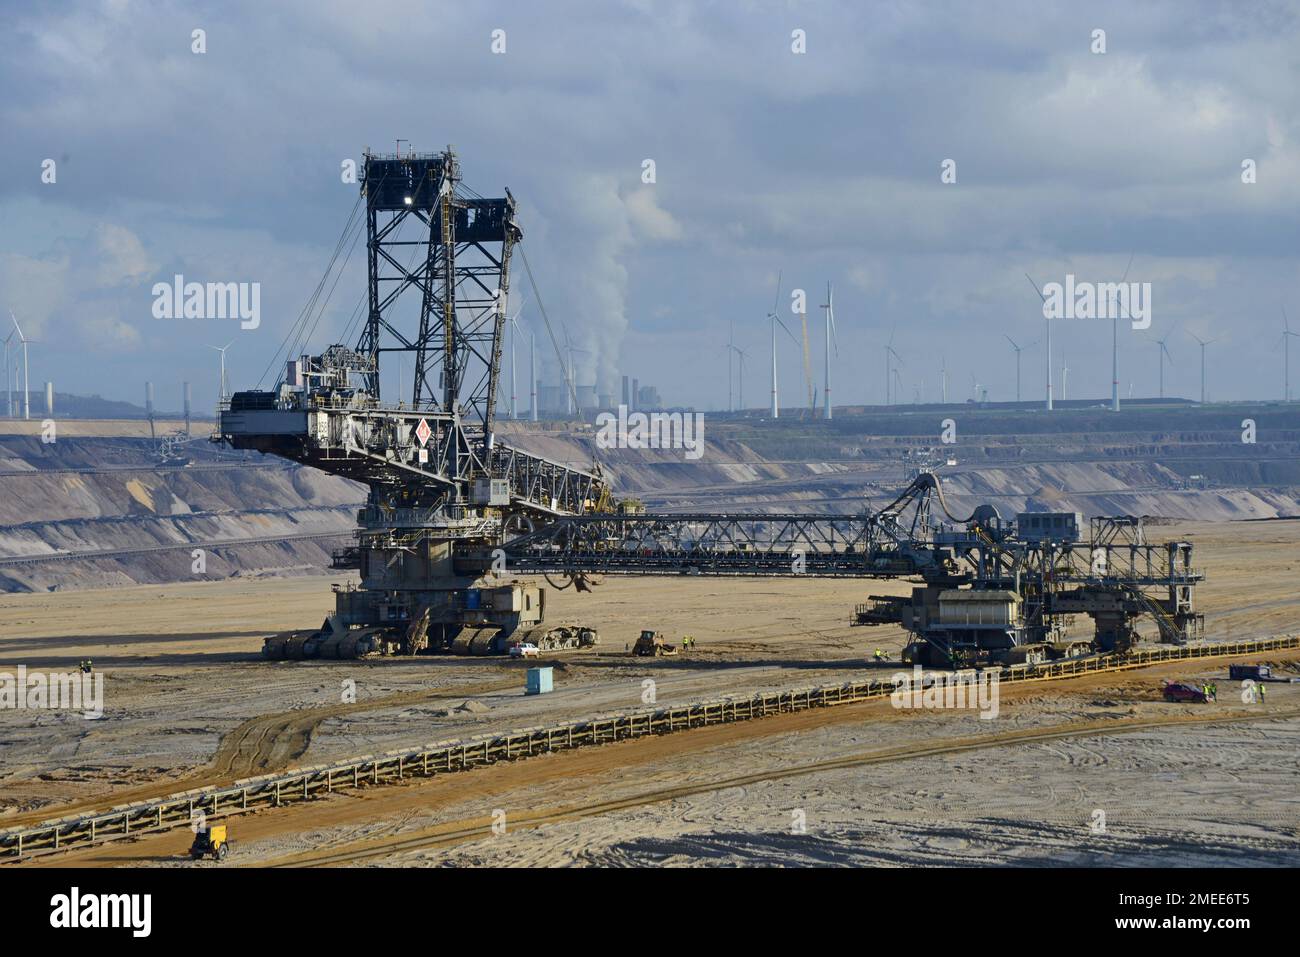 Giant bucket wheel excavator in Garzweiler mine, Germany, digging lignite brown coal for Neurath power station, sites of protests re climate change Stock Photo